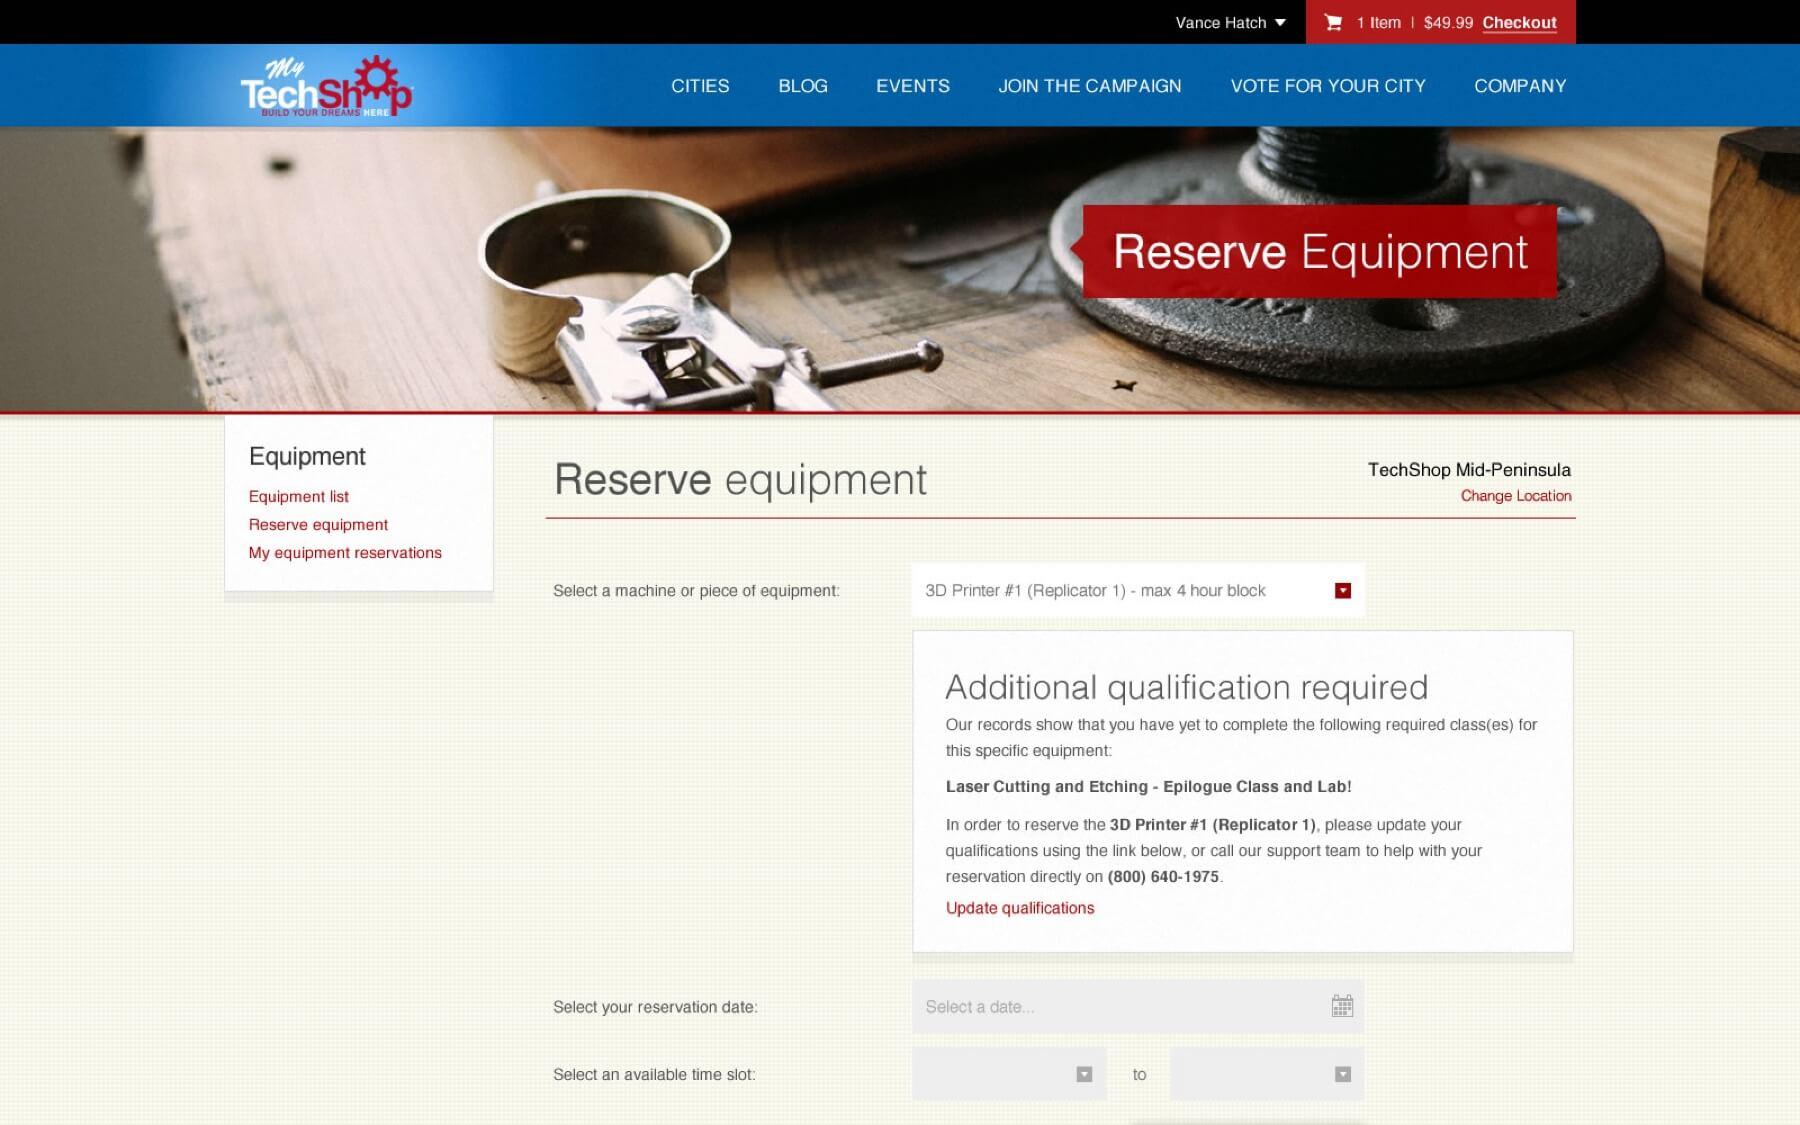 A screenshot of the equipment reservation page